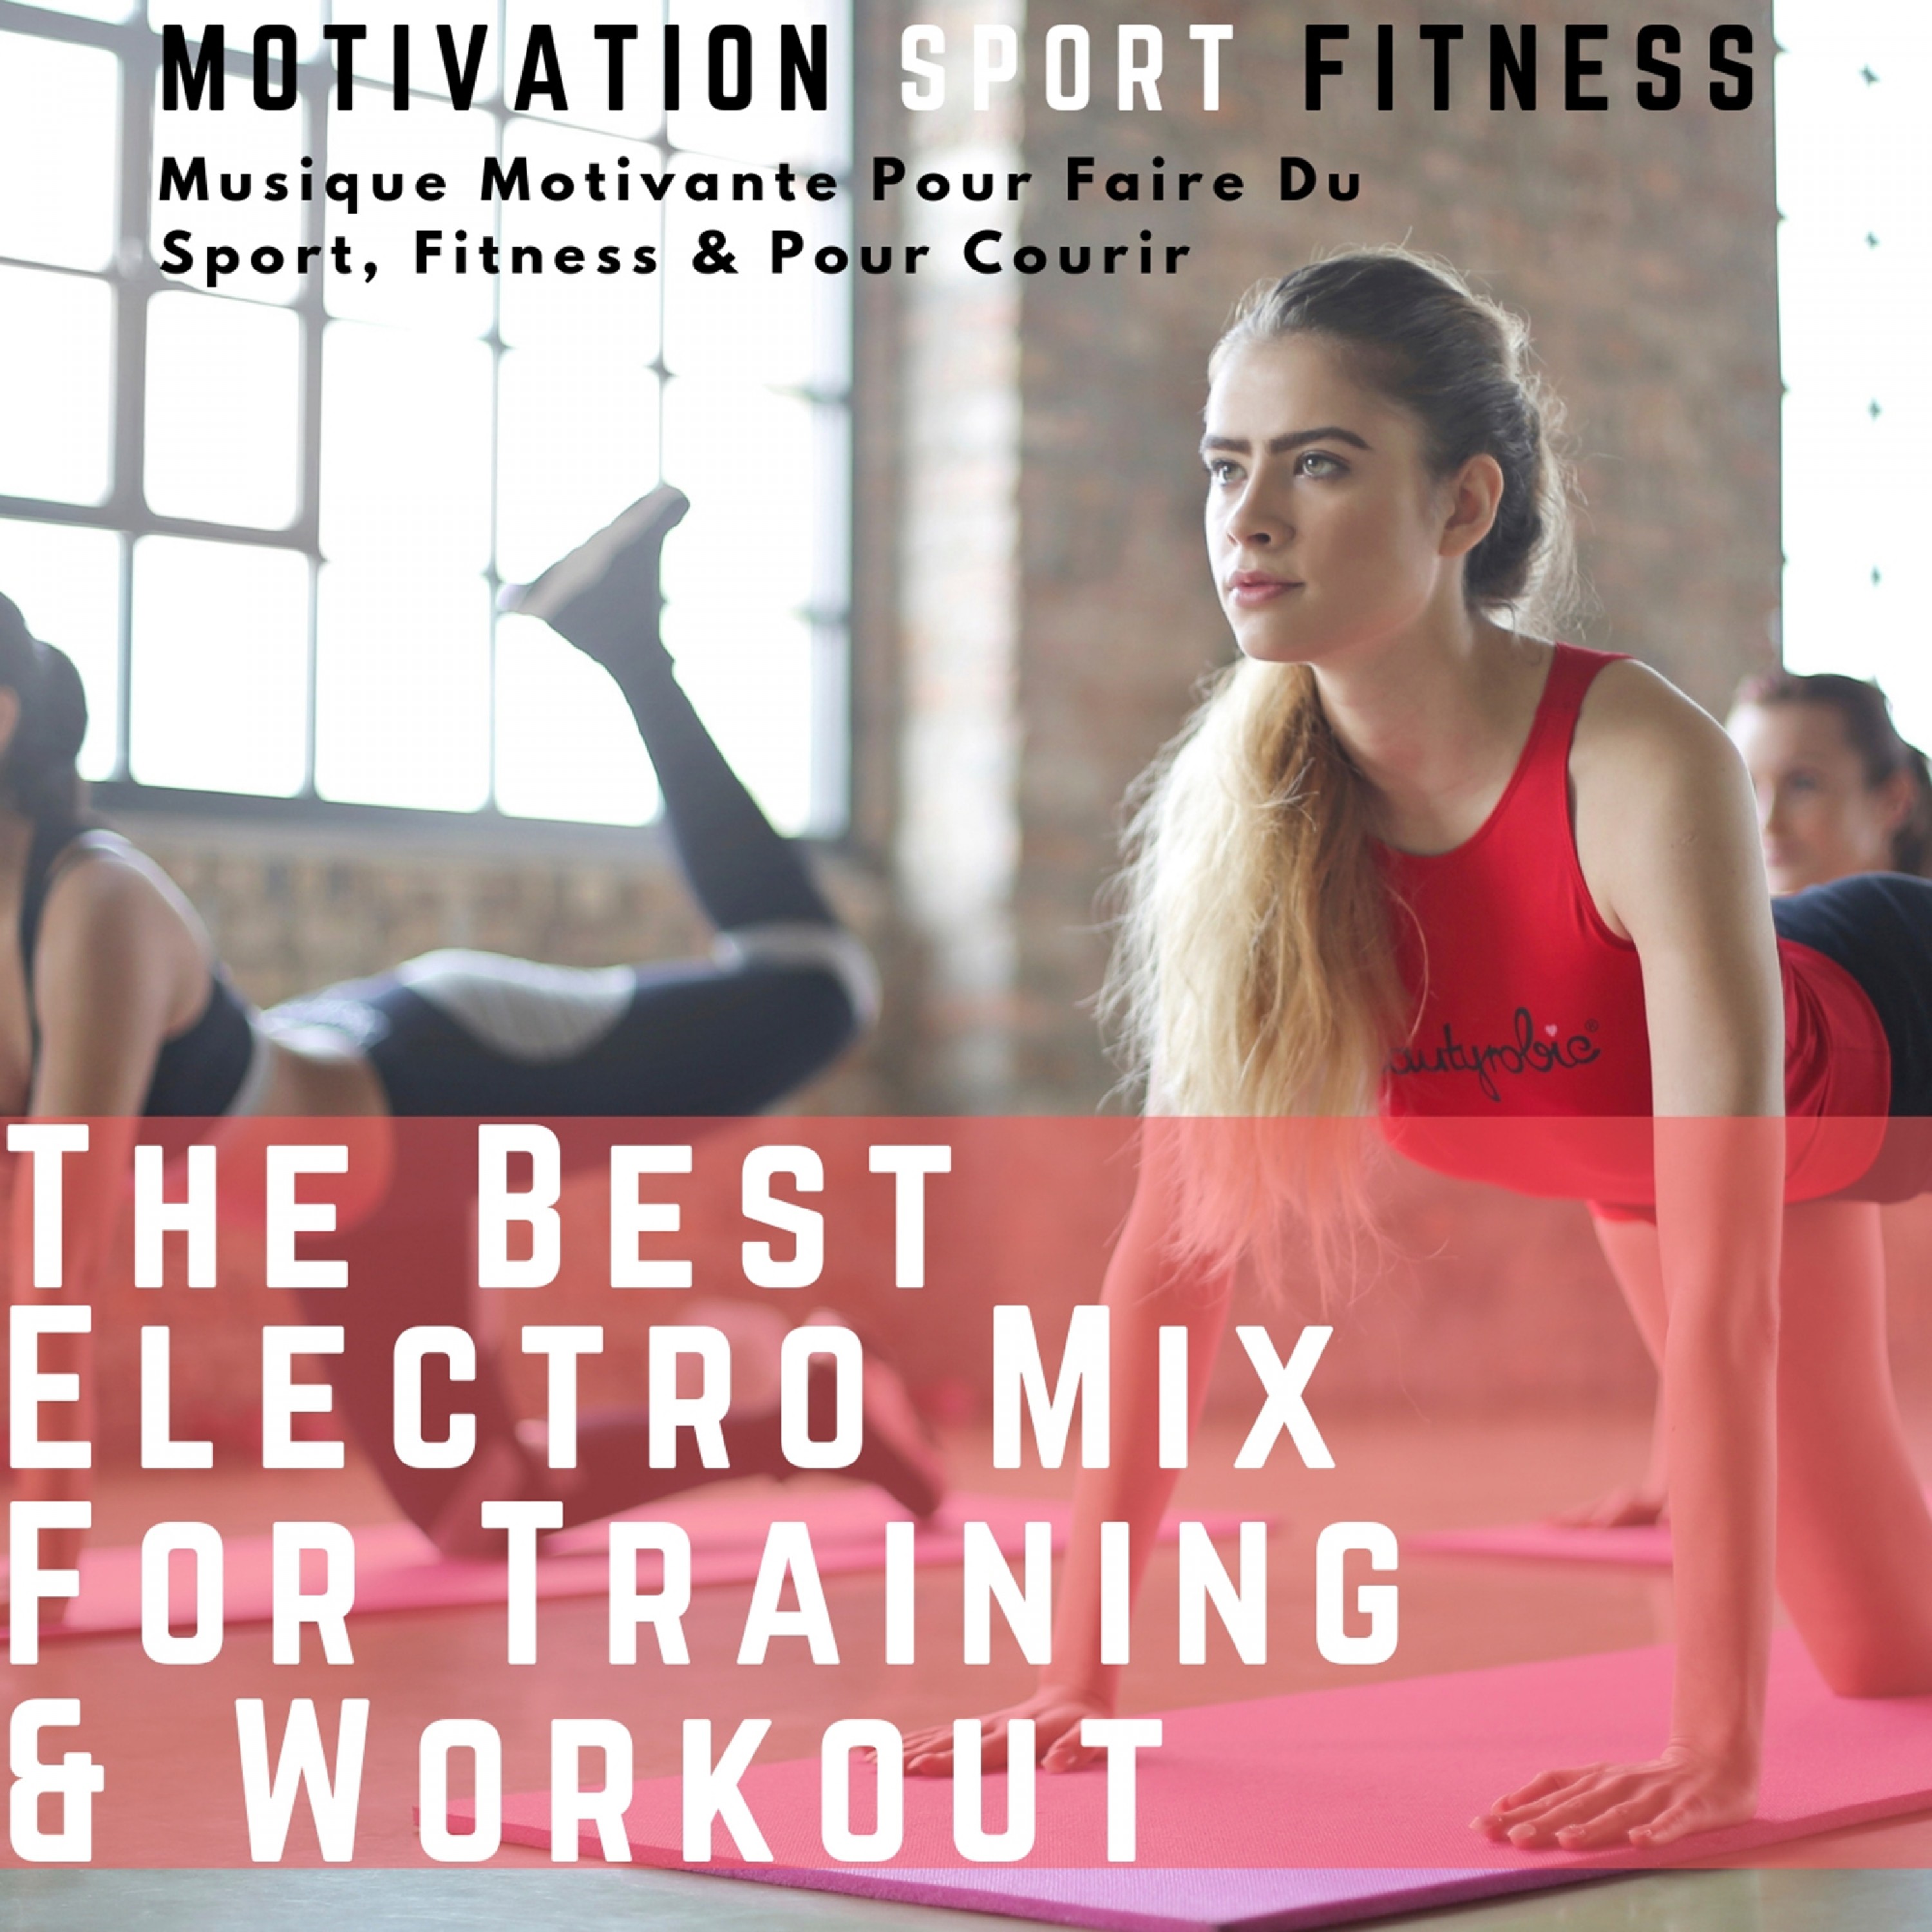 The Best Electro Mix for Training & Workout